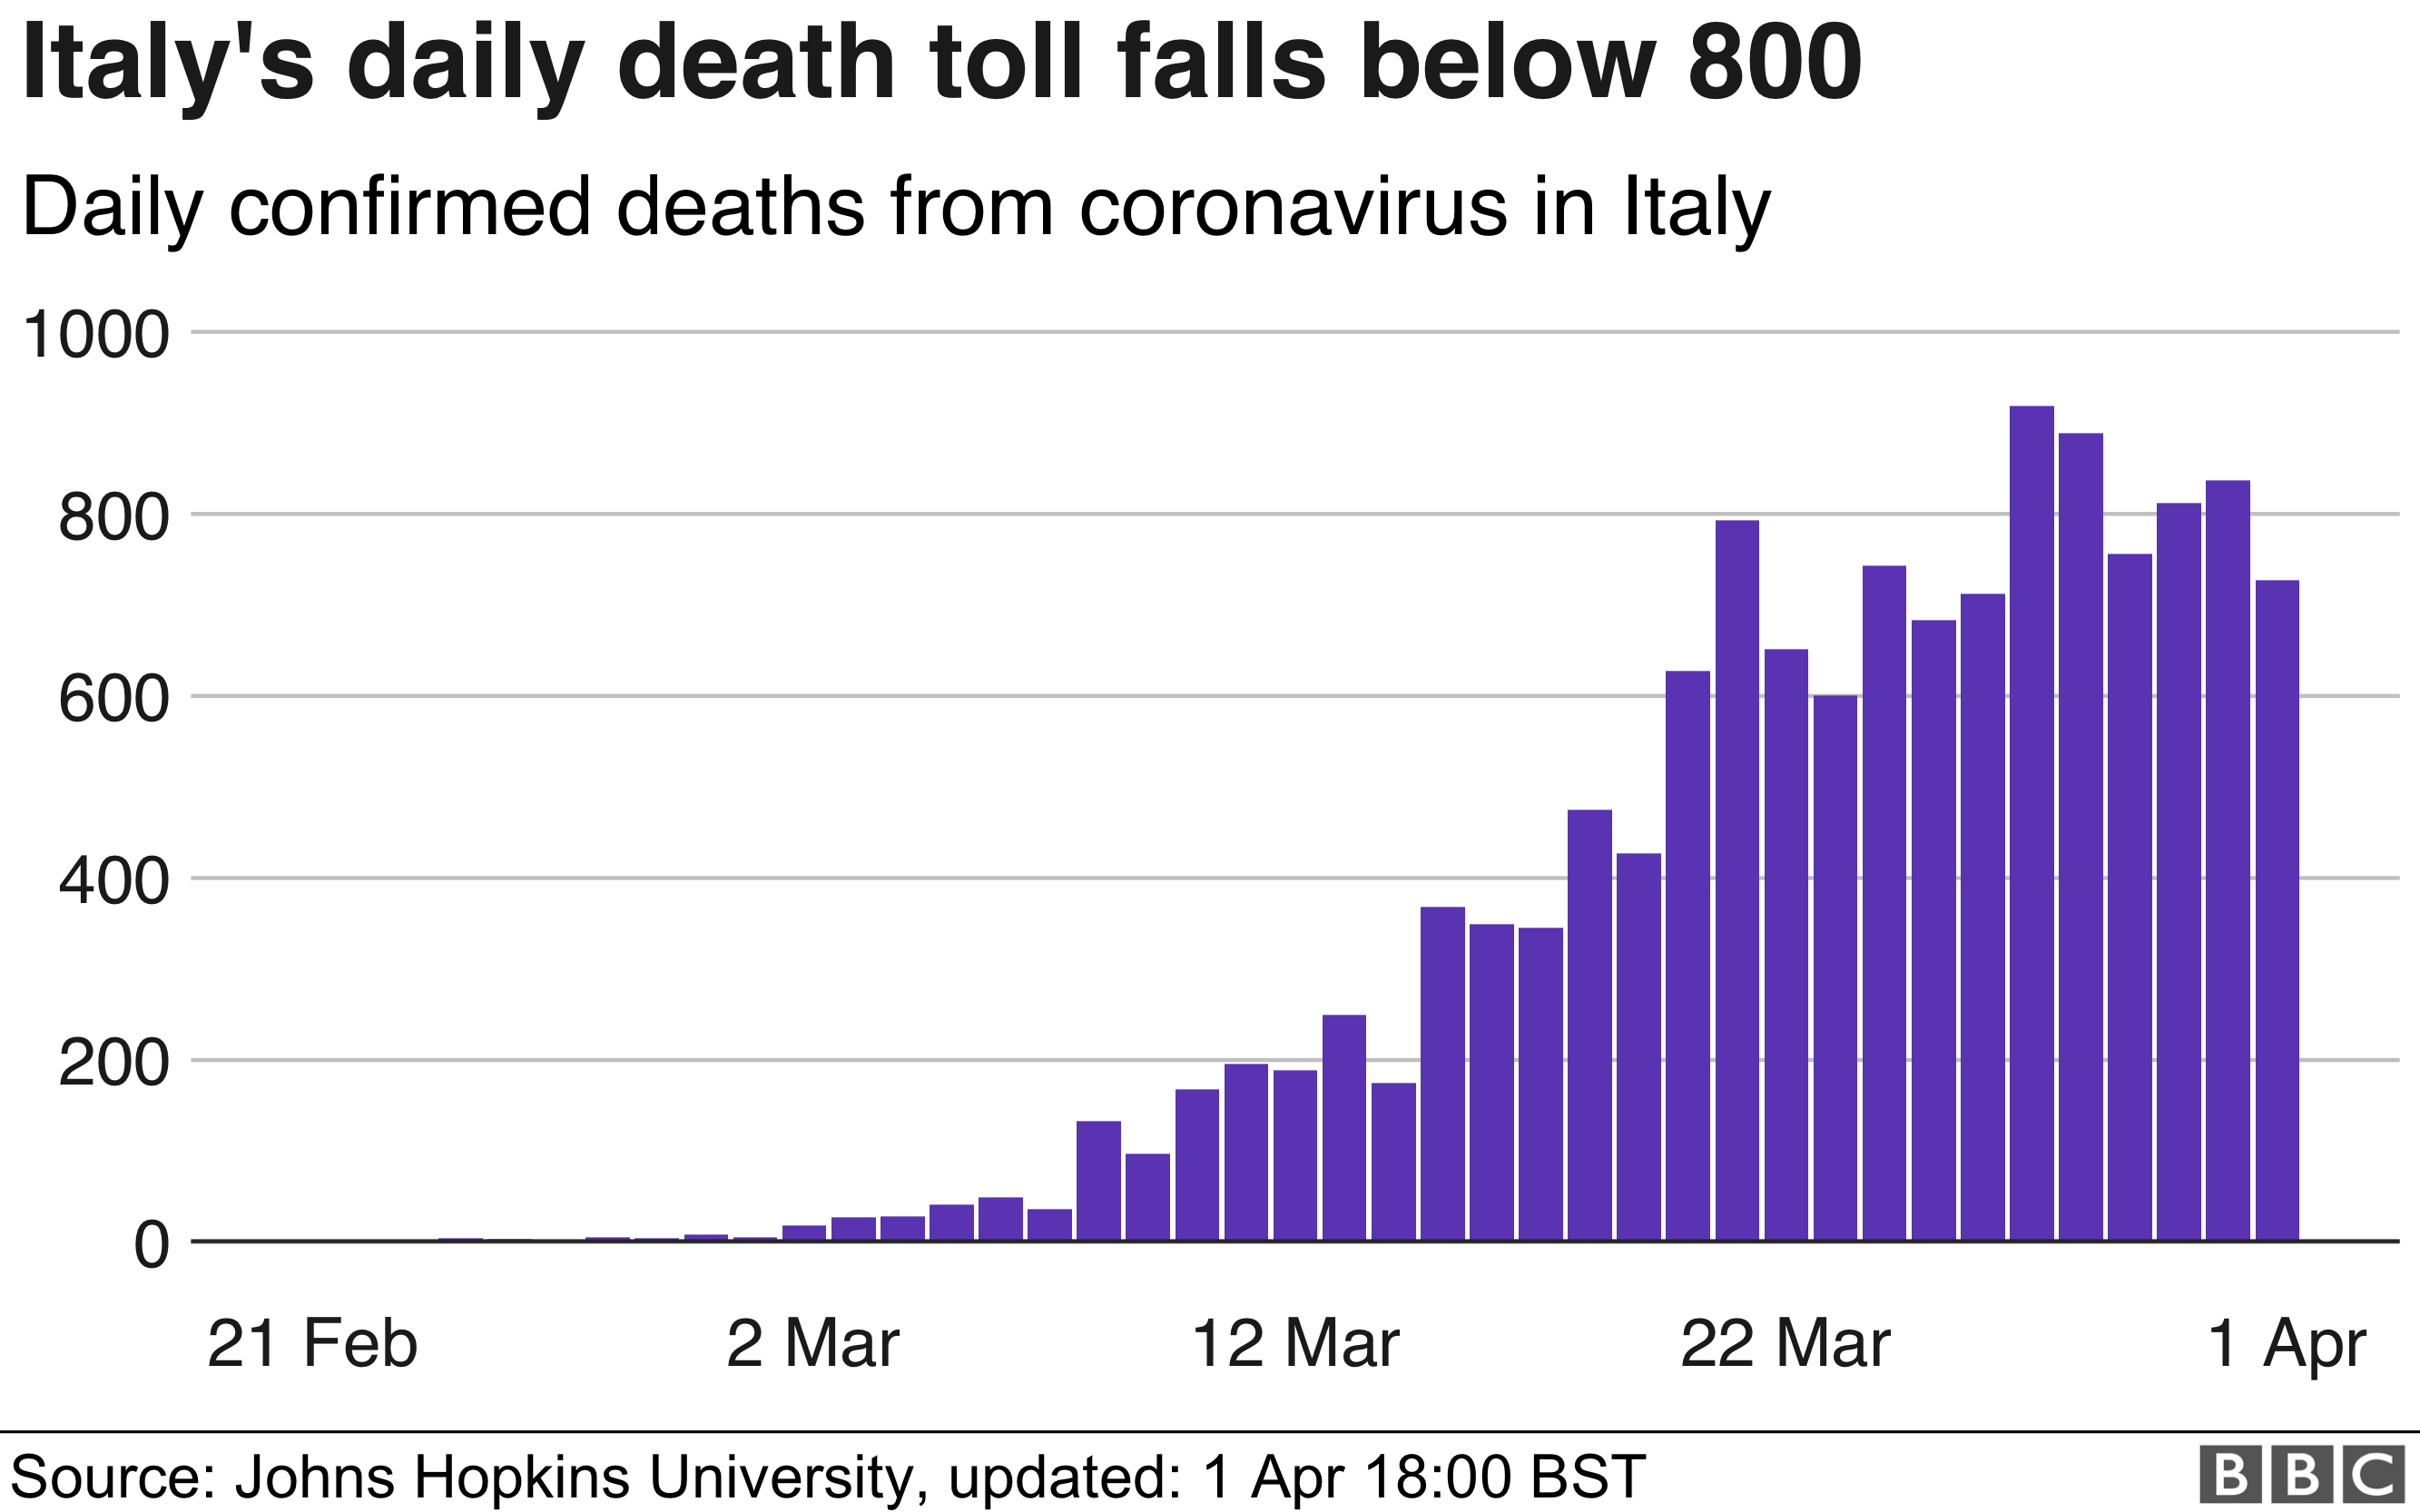 Chart showing the daily death toll in Italy